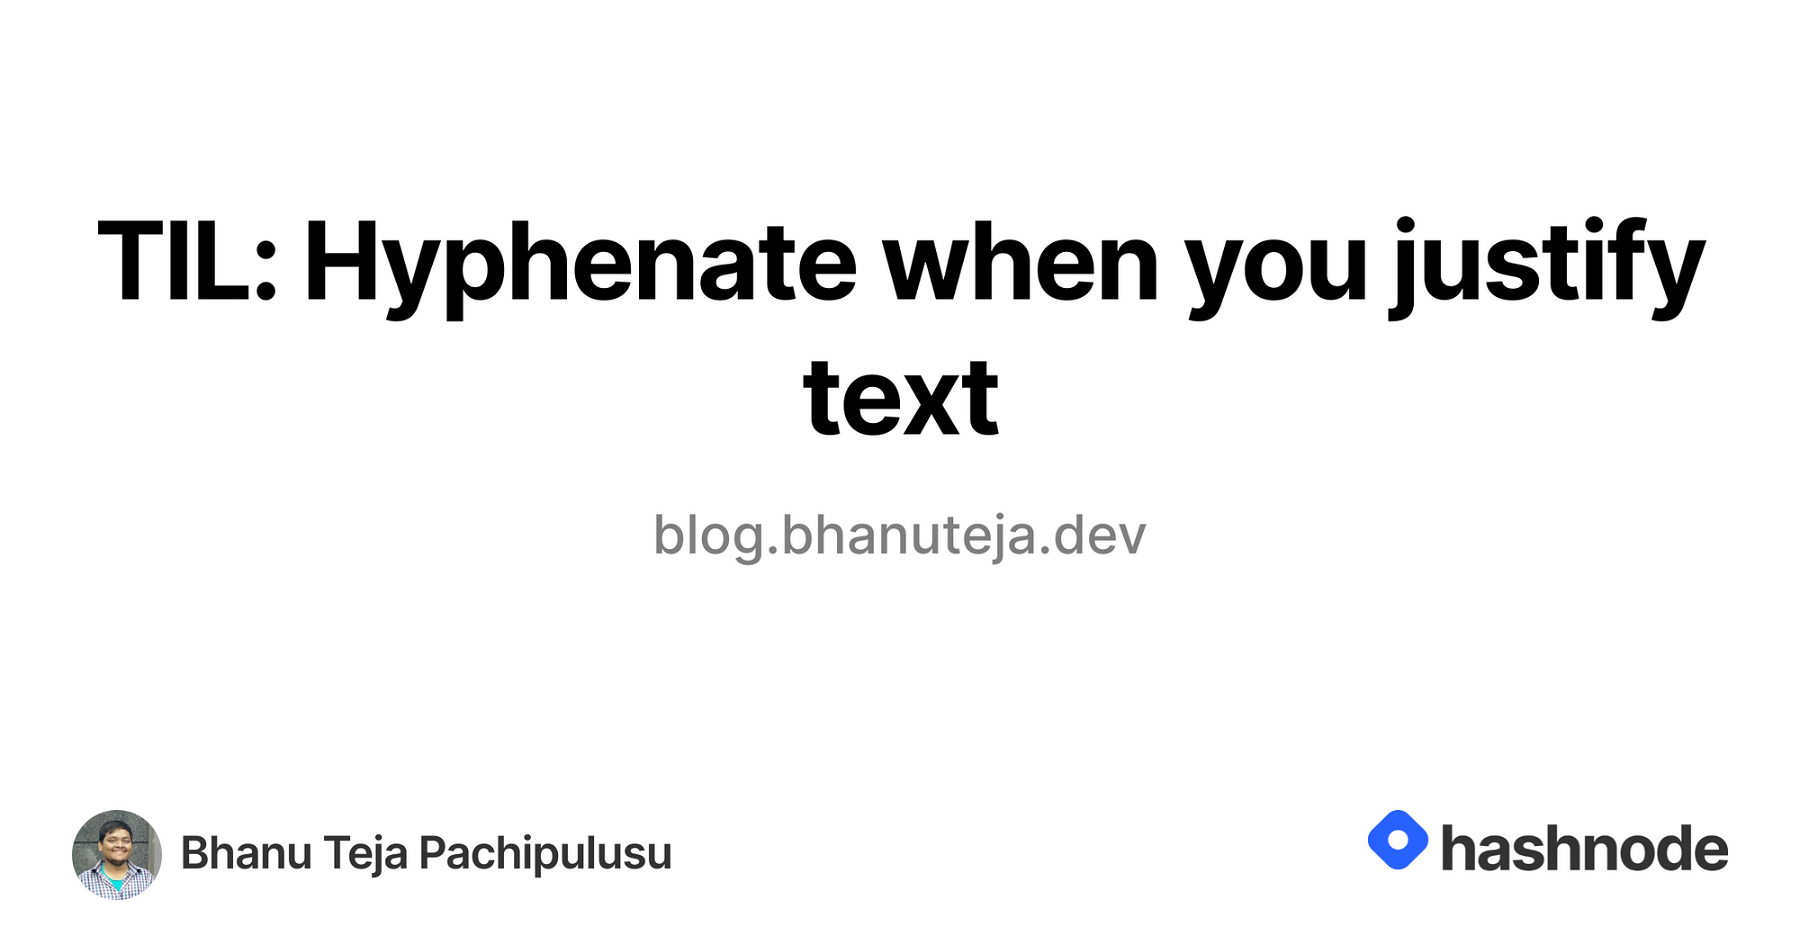 TIL: Hyphenate when you justify text